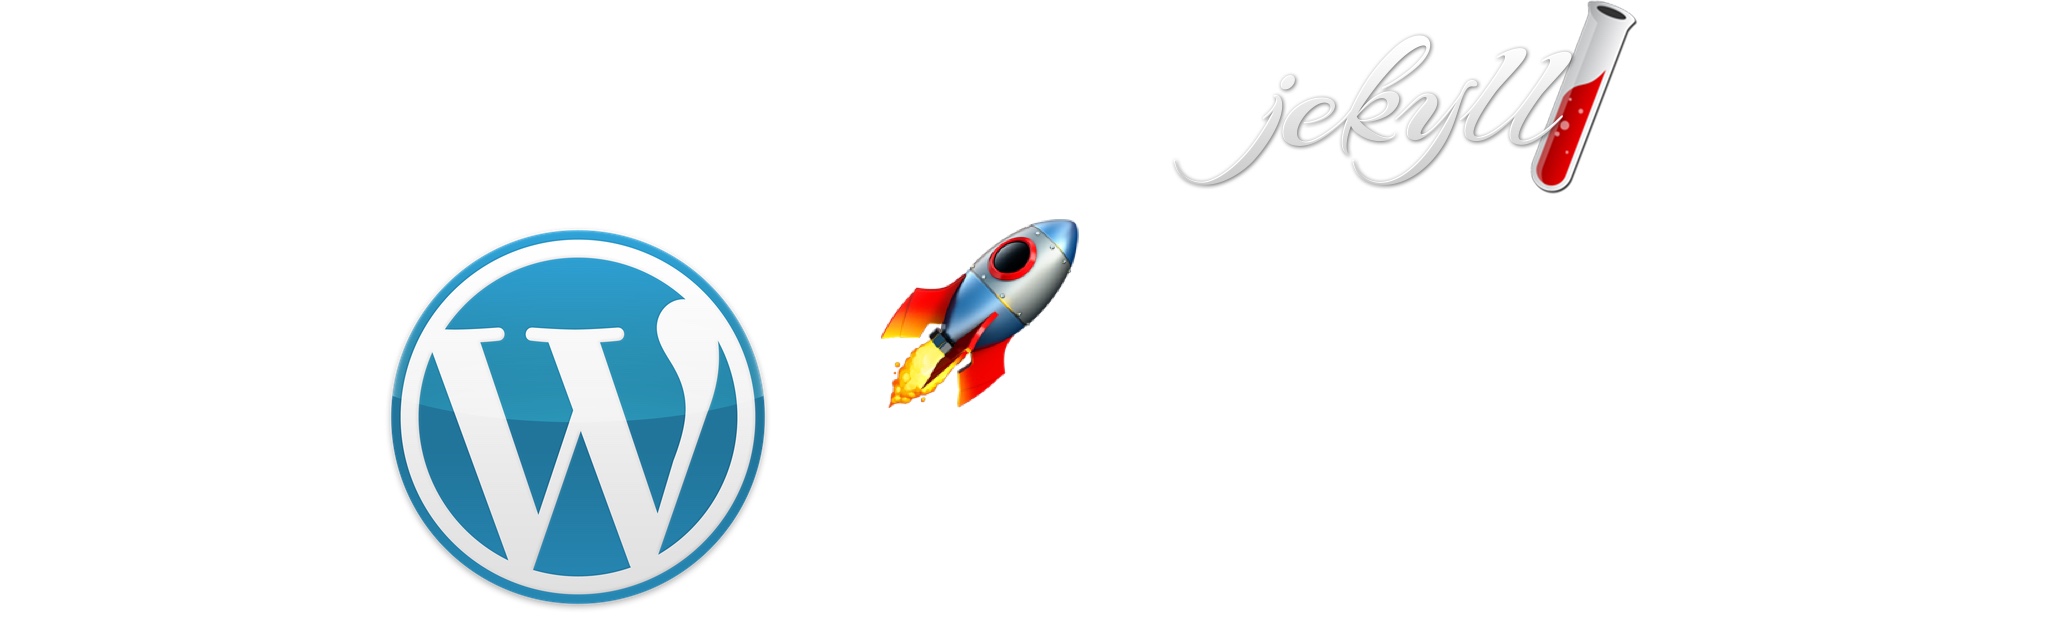 picture of a rocket flying from the Wordpress logo to the Jekyll logo